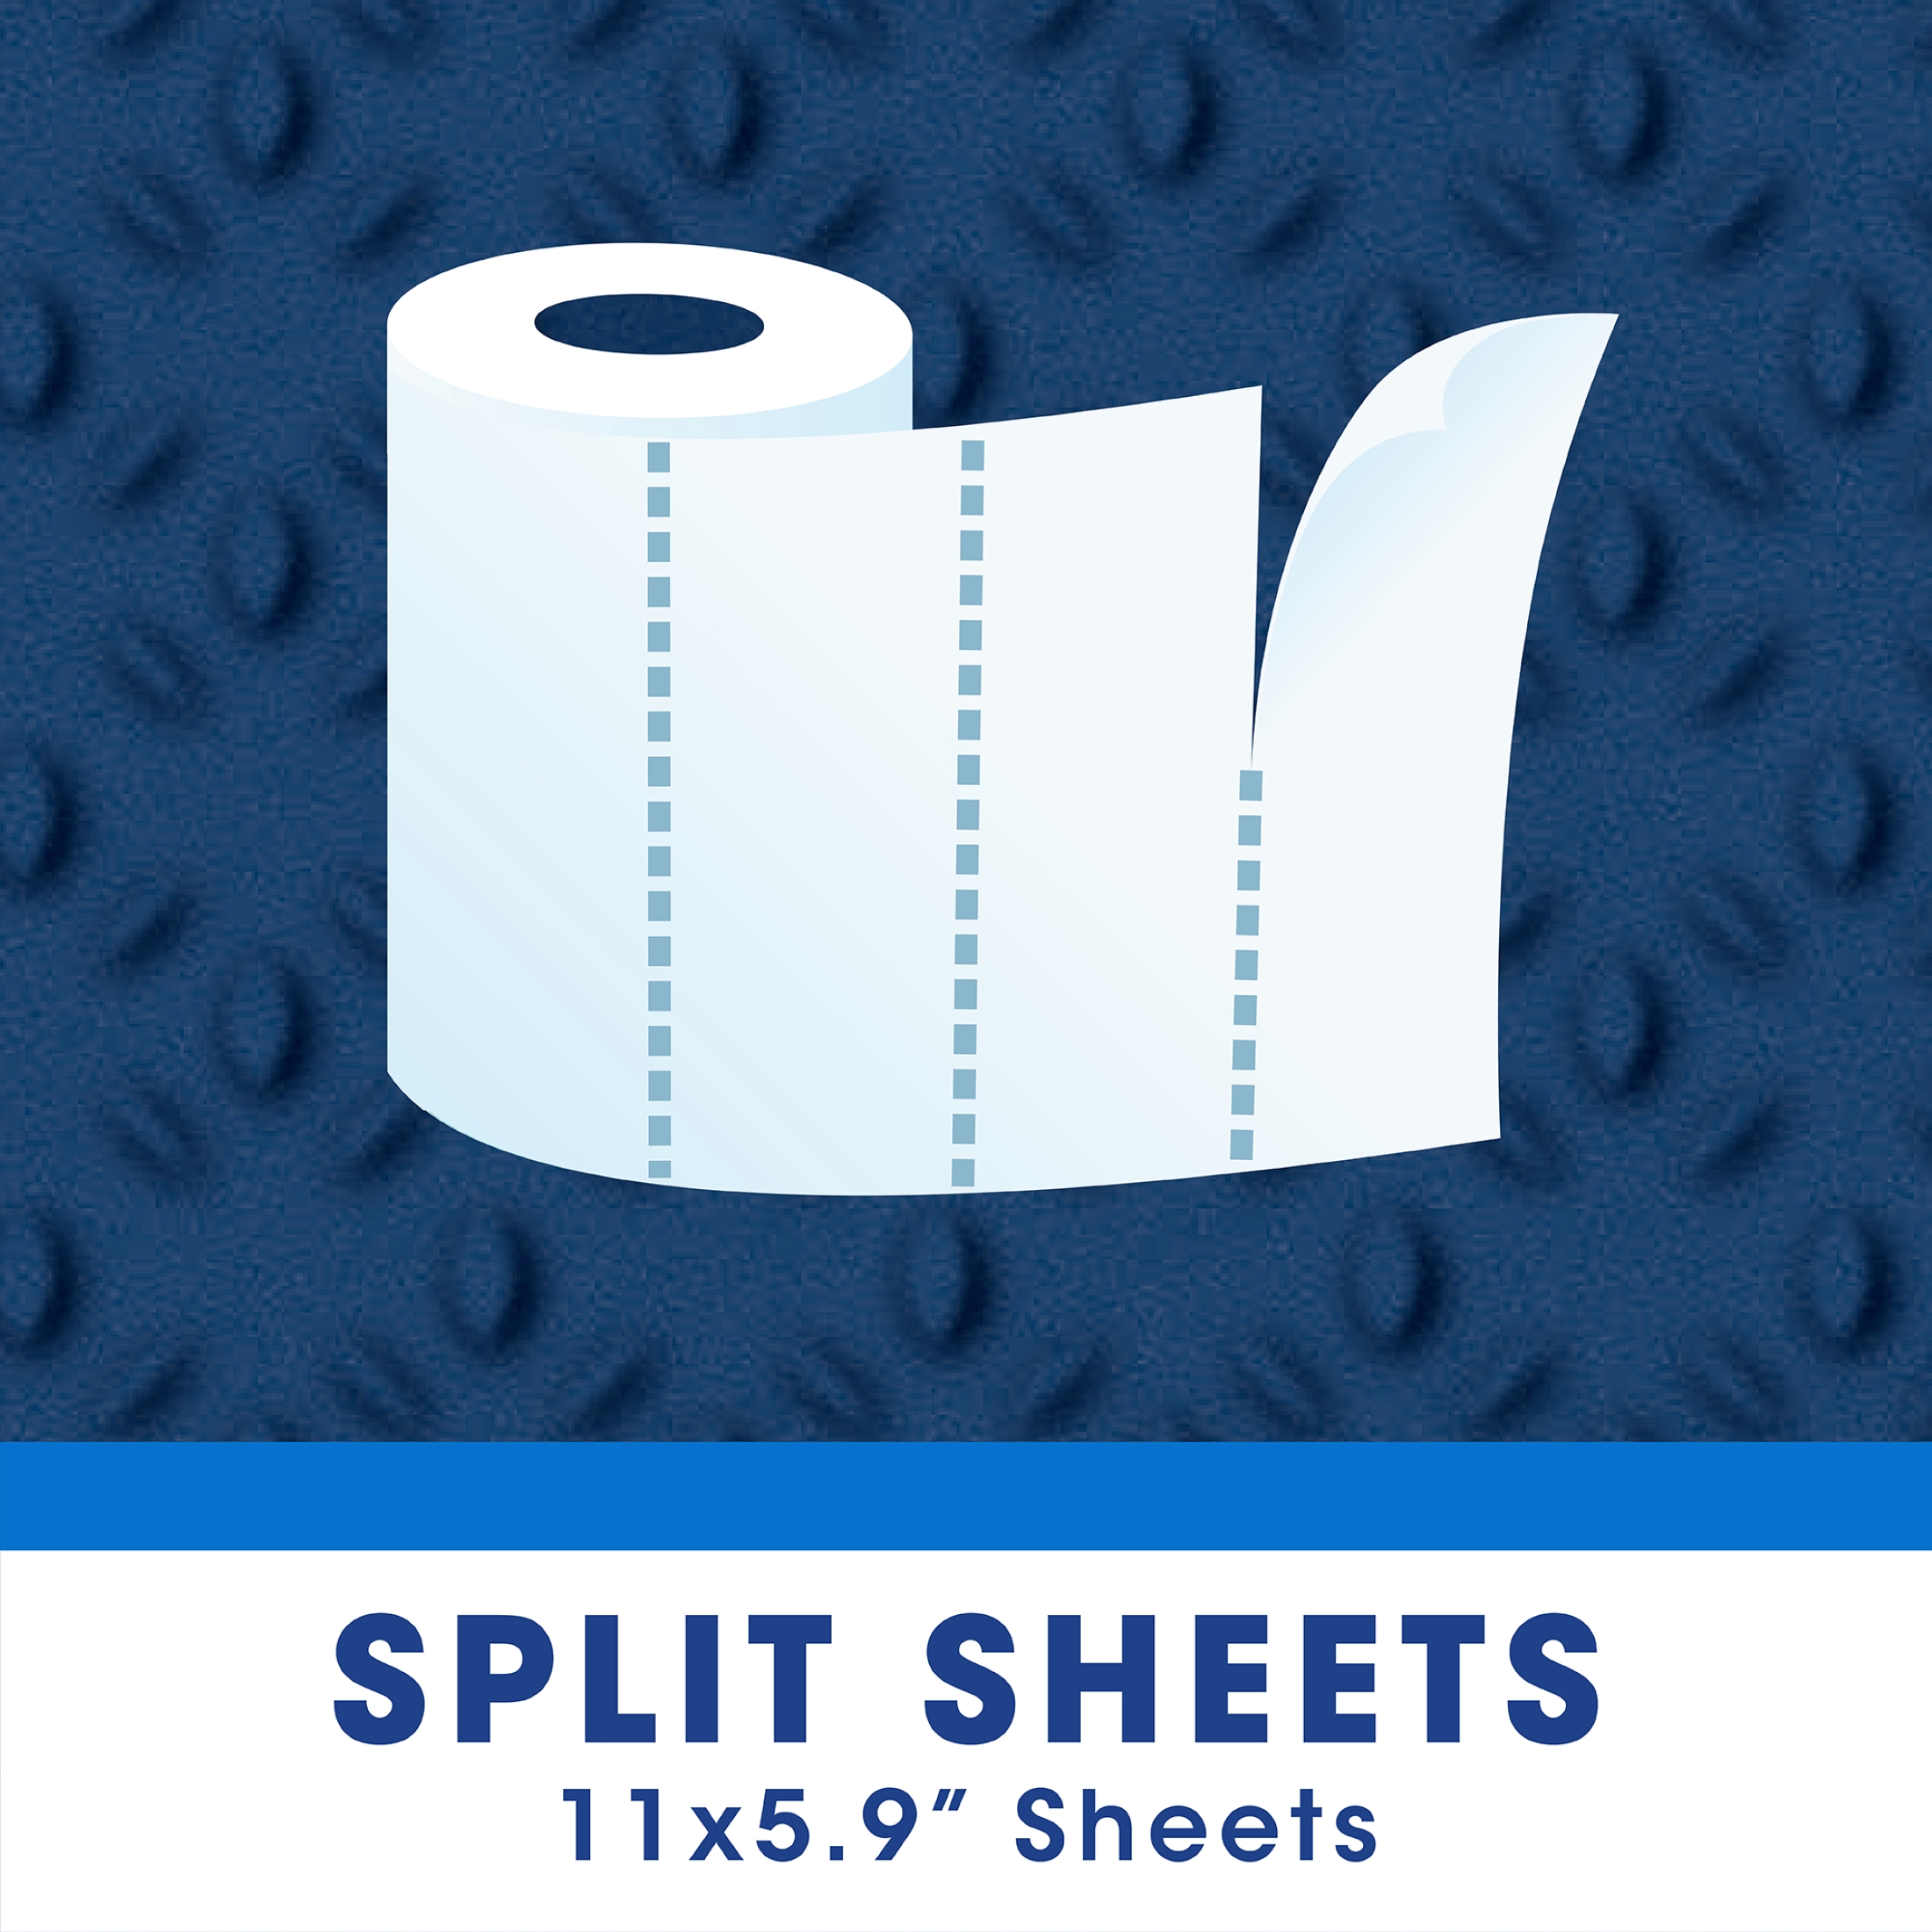 Great Value Ultra Strong Paper Towels, Split Sheets, 12 Double Rolls - image 4 of 10